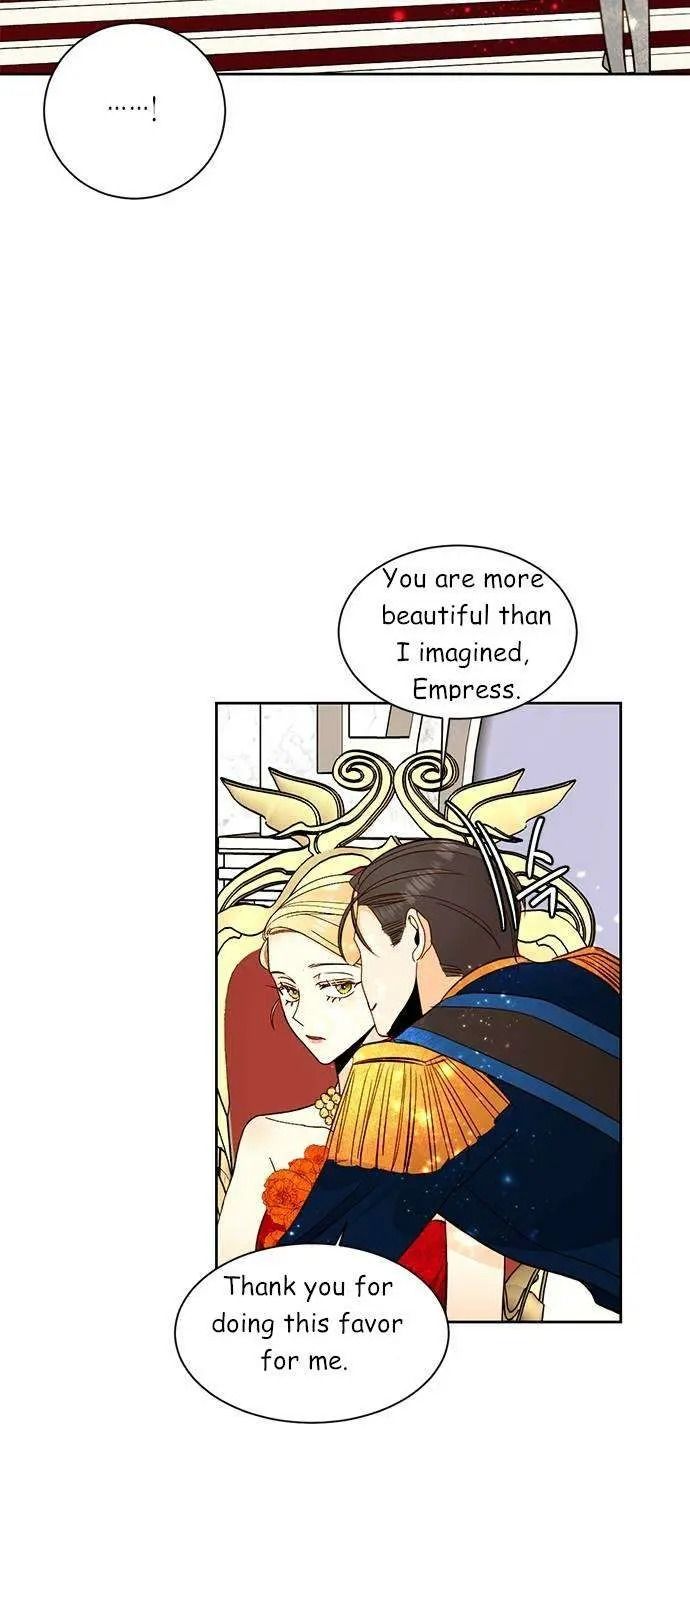 Remarried Empress - Chapter 32 Page 2